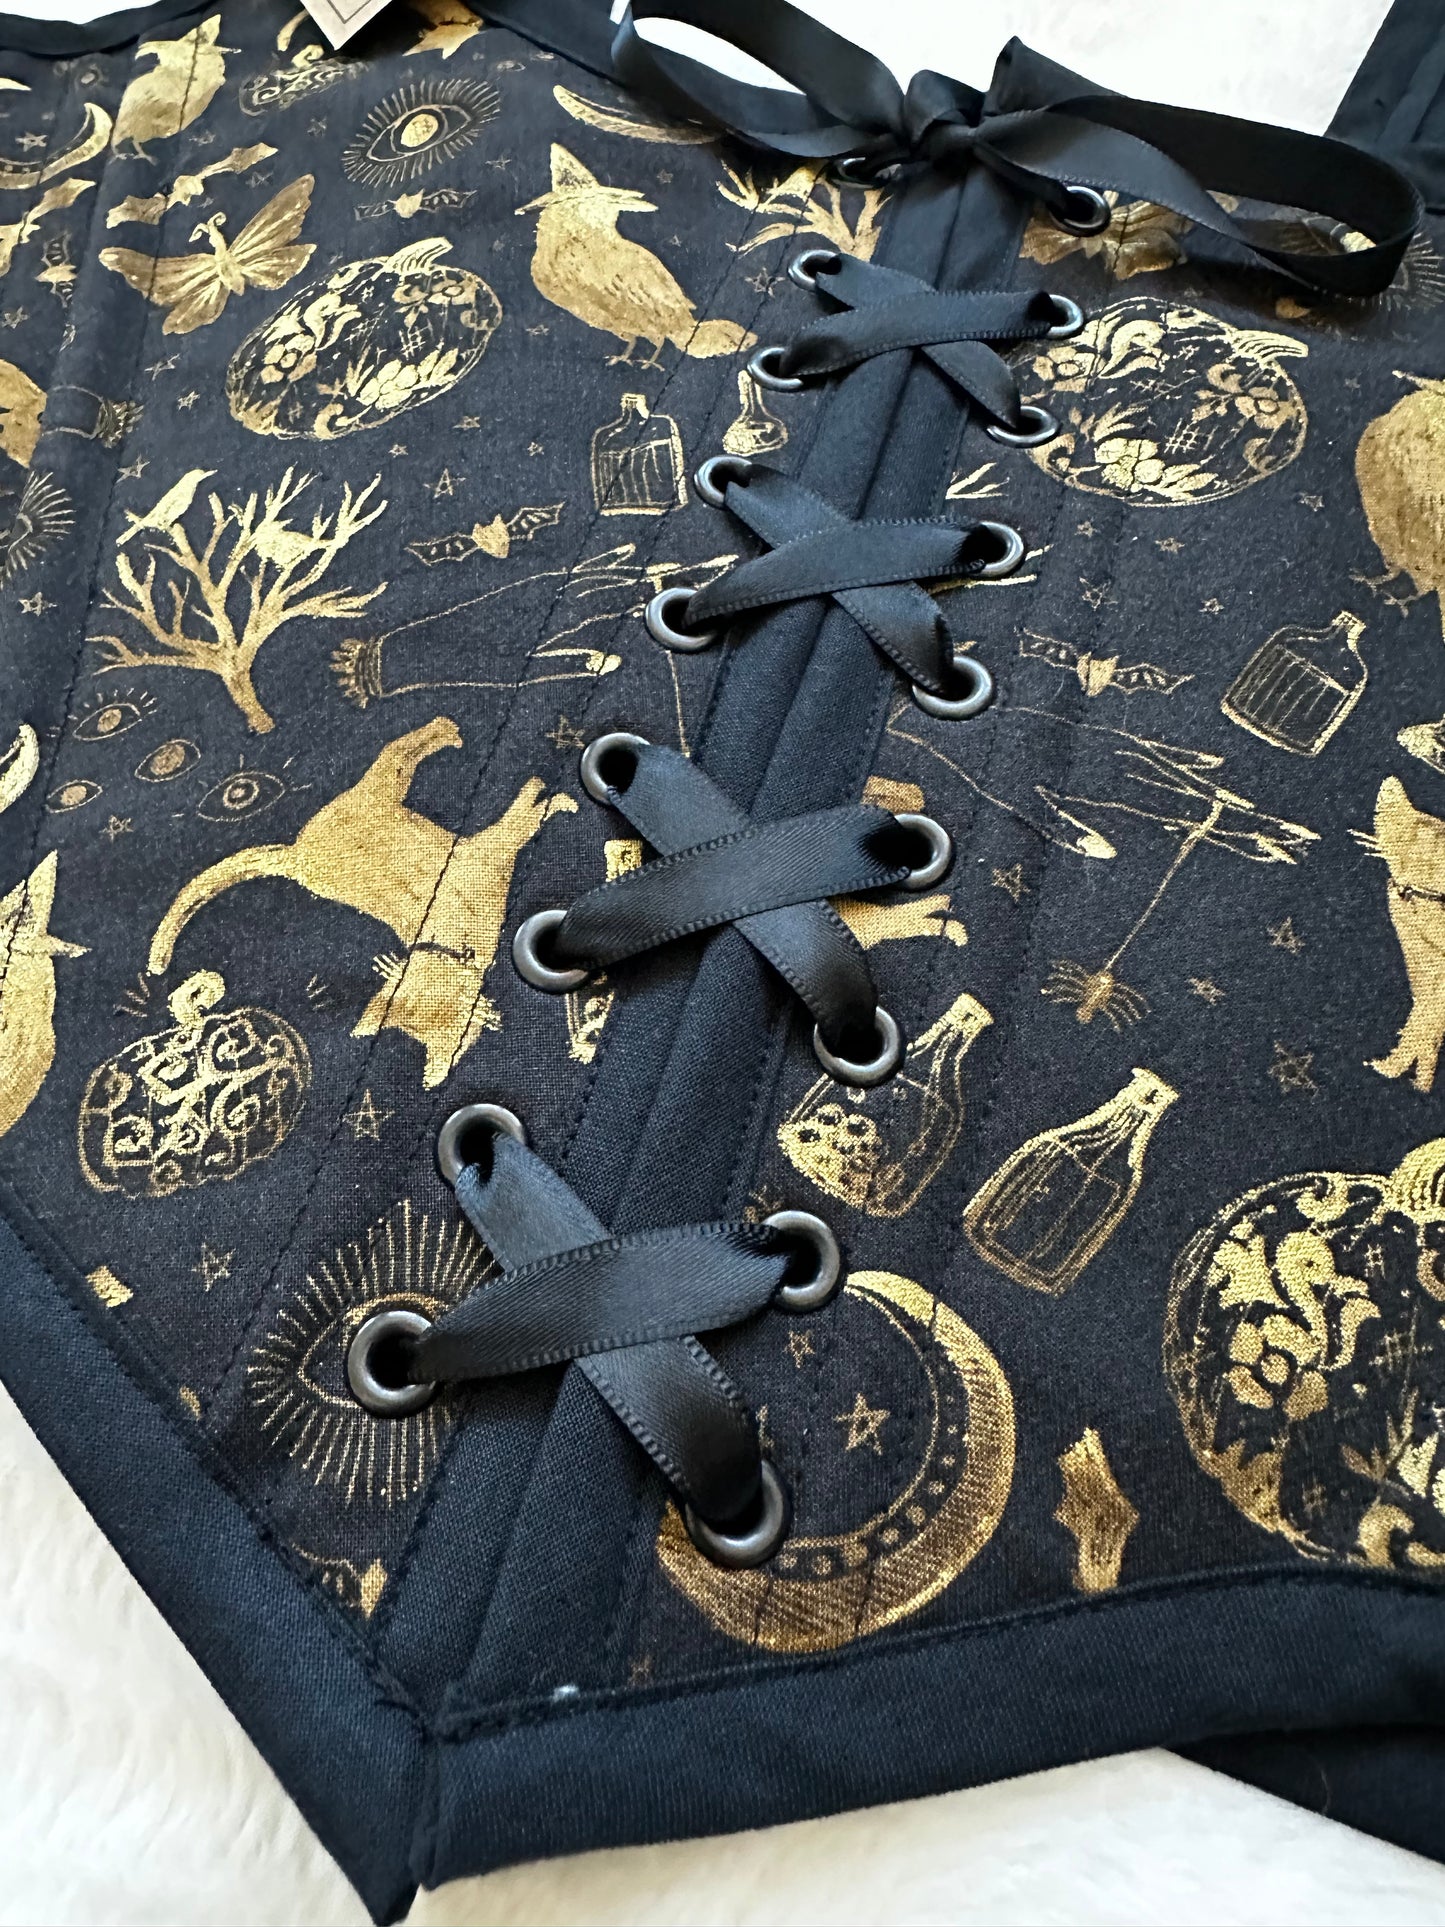 Close up of renaissance bodice in black fabric with gold patterned print. Pattern contains cats, trees, moons, bottles, and moths in gold. Black ribbon is tied in the middle. Bodice is on a white fuzzy blanket.